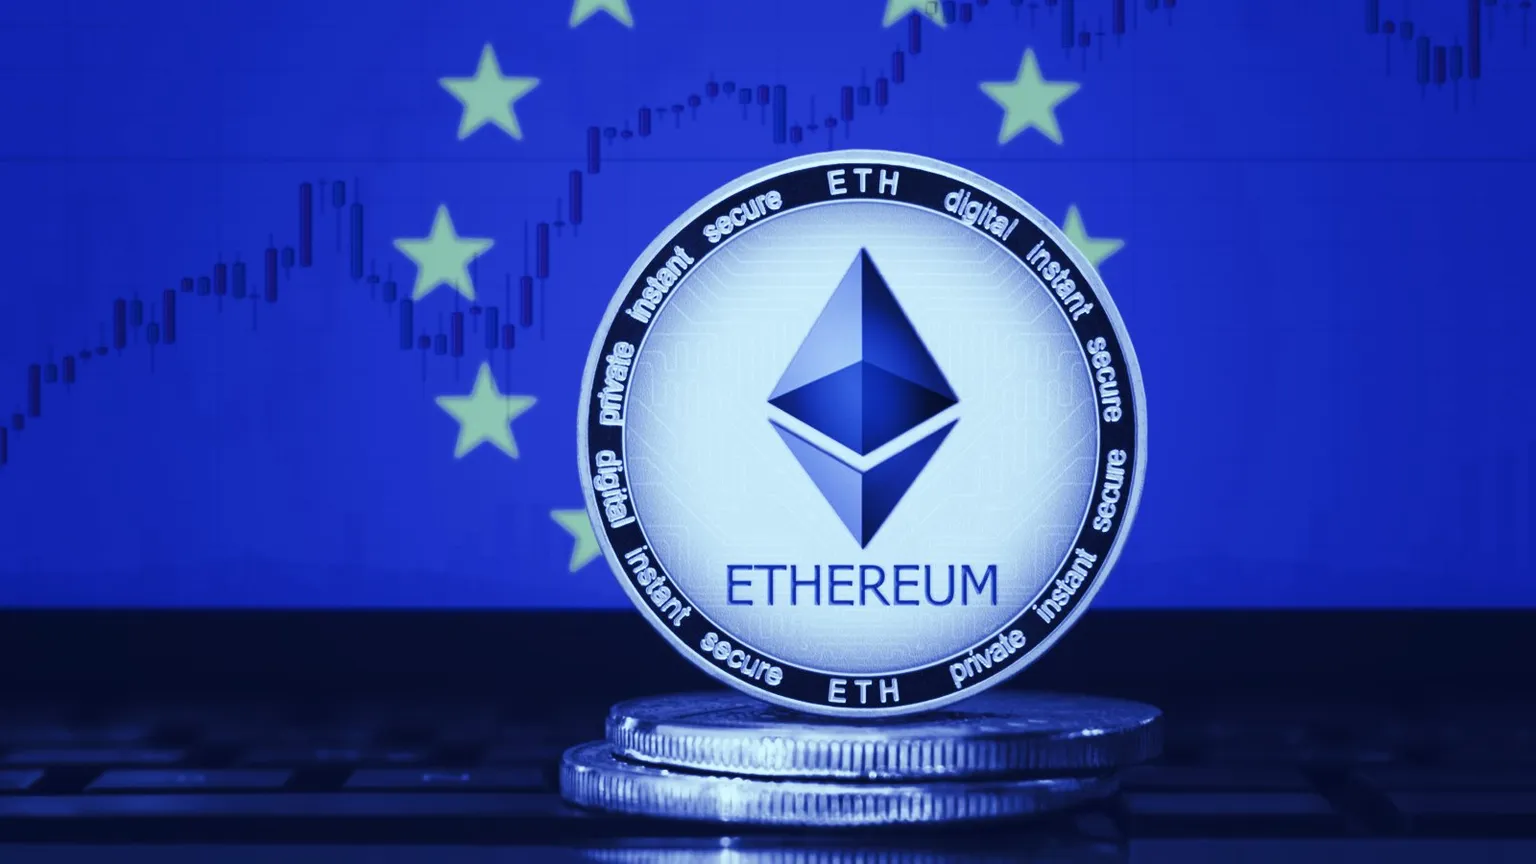 Ethereum dominates the rapidly growing blockchain industry in Europe. (Image: Shutterstock)